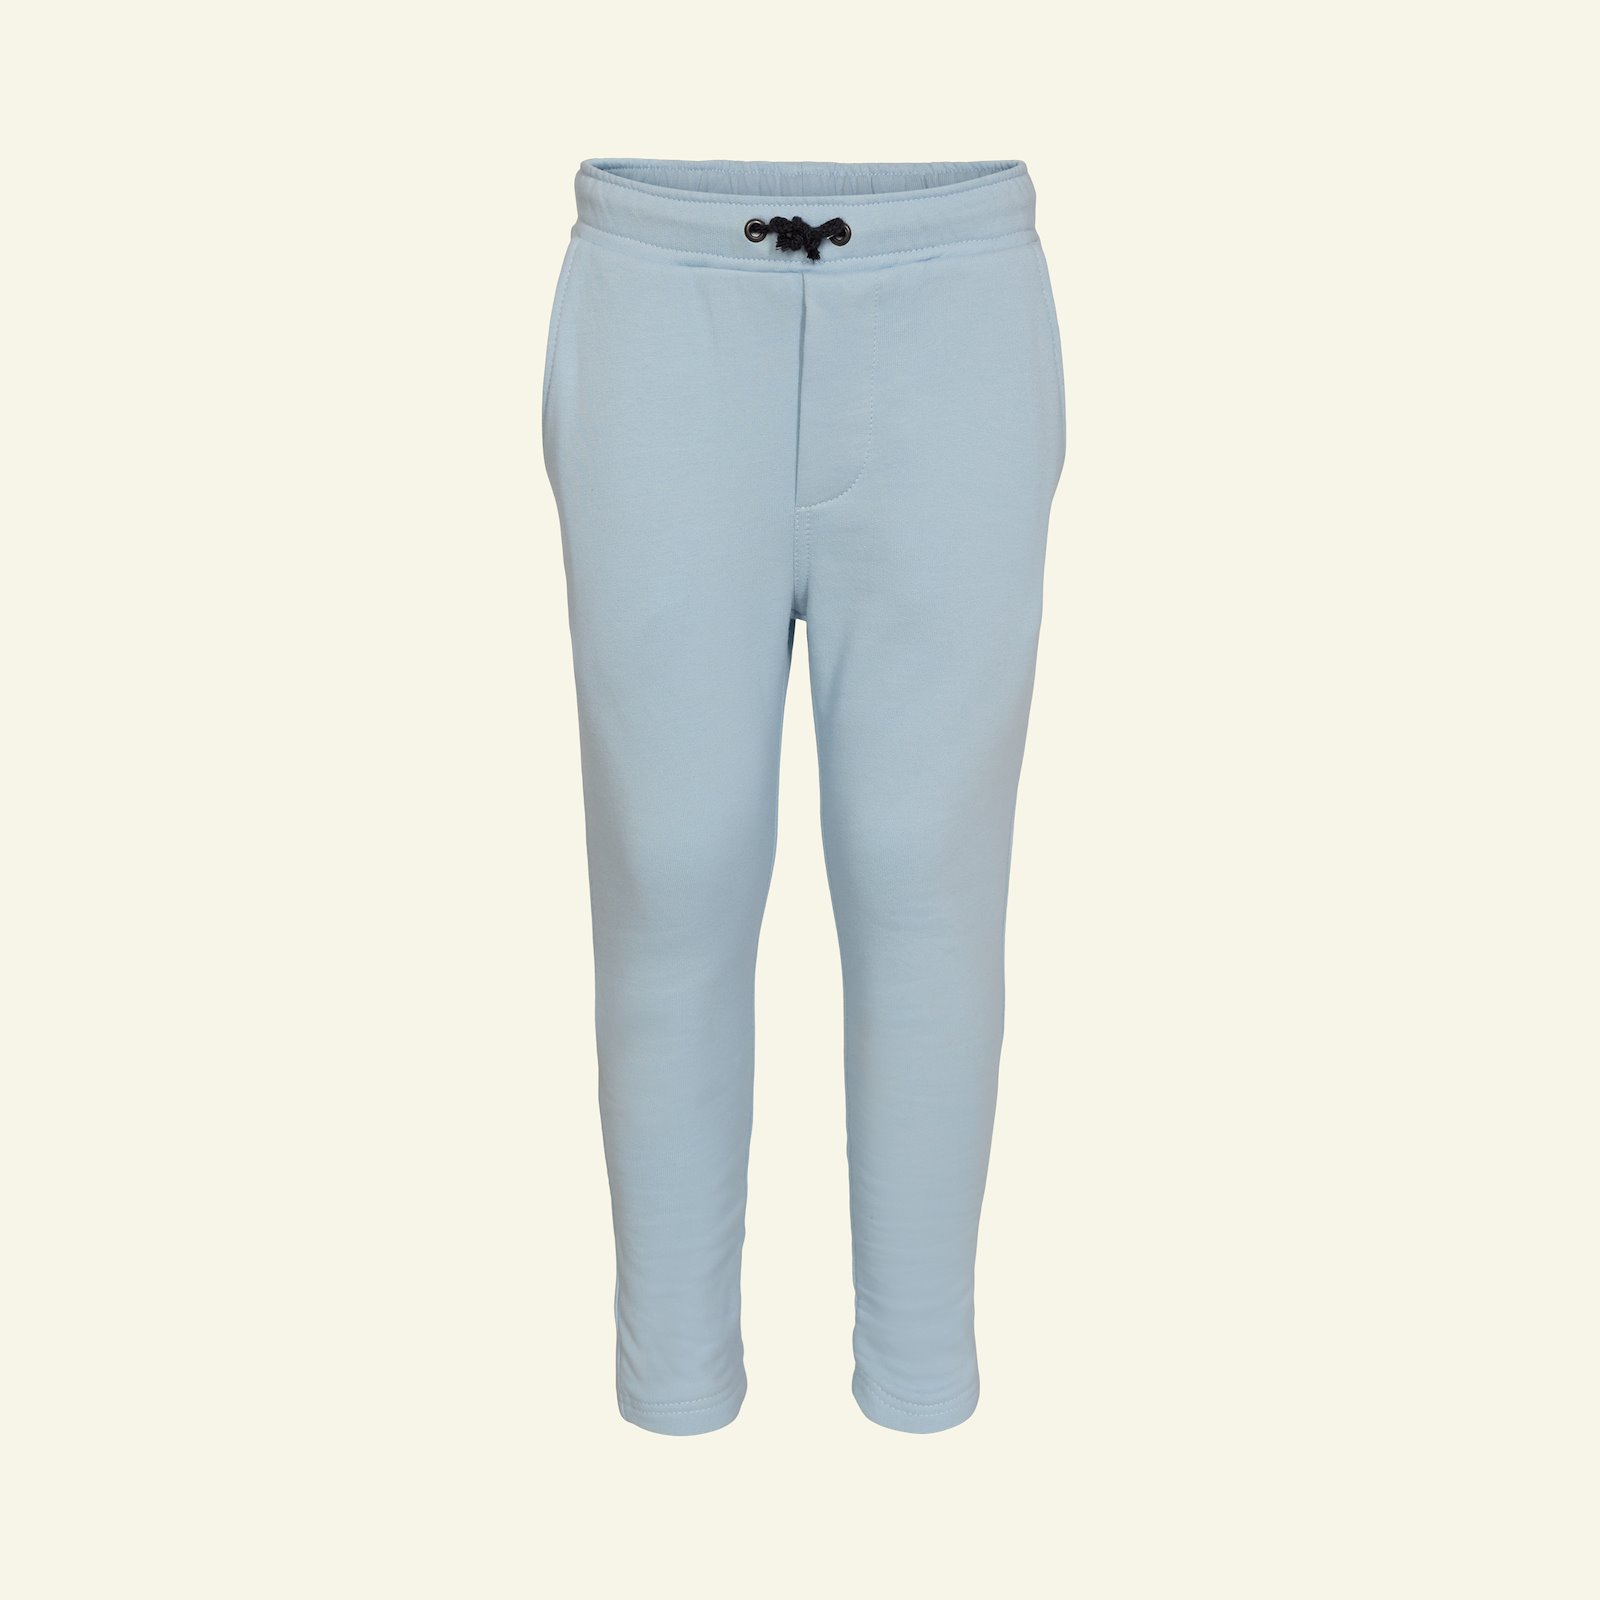 Trousers, 128/8y p60035_211777_sskit